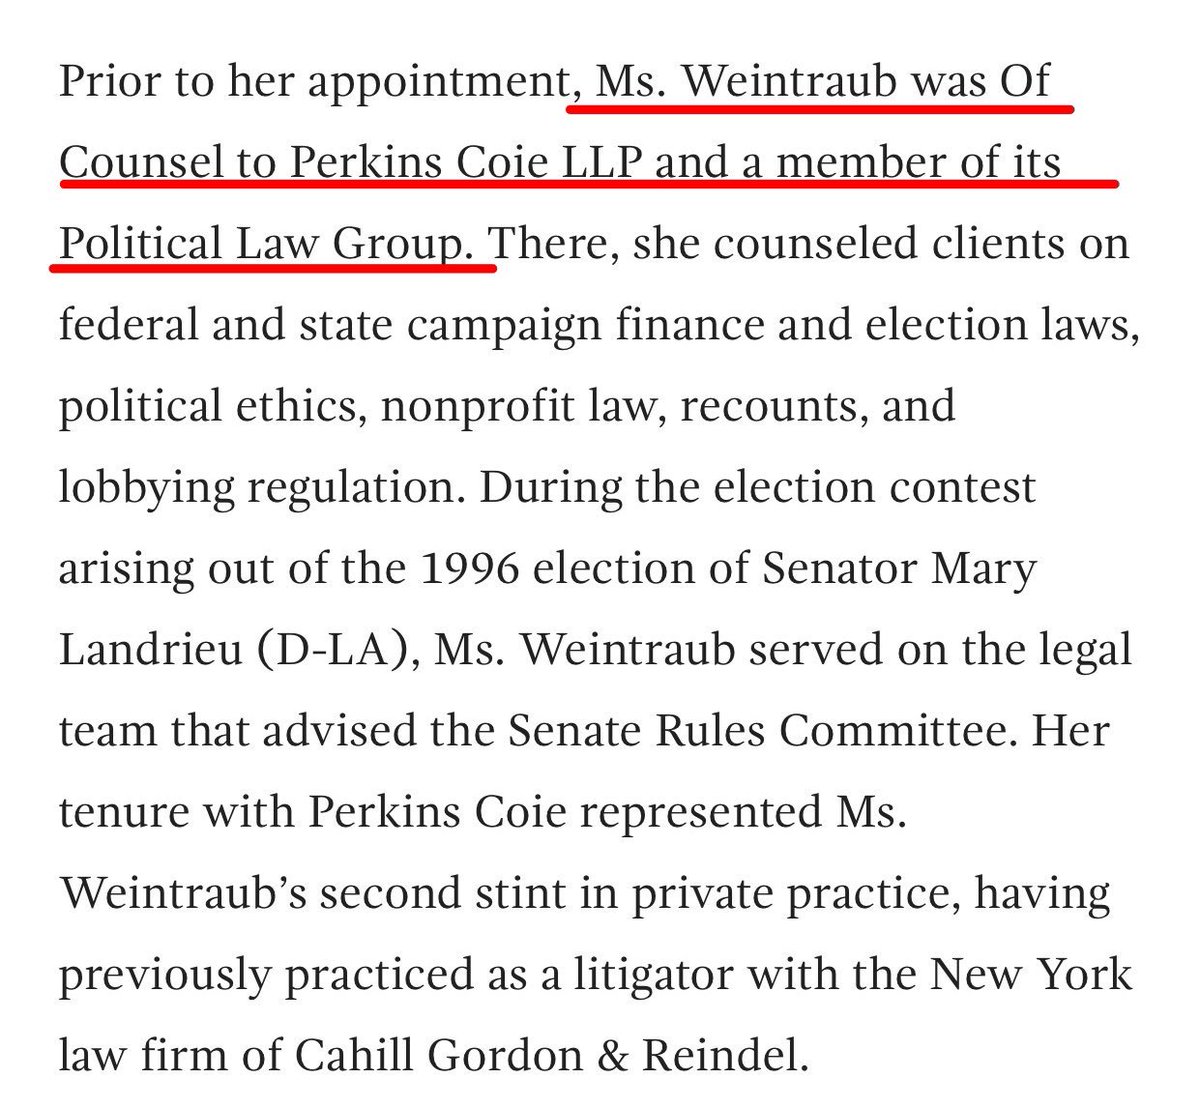 (12) You might be wondering how all this money from Democrats makes it to  #PerkinsCoie without raising any red flags with the  #FEC ?!? Ah well, the commissioner is a former lawyer there as part of their Political Law Group 